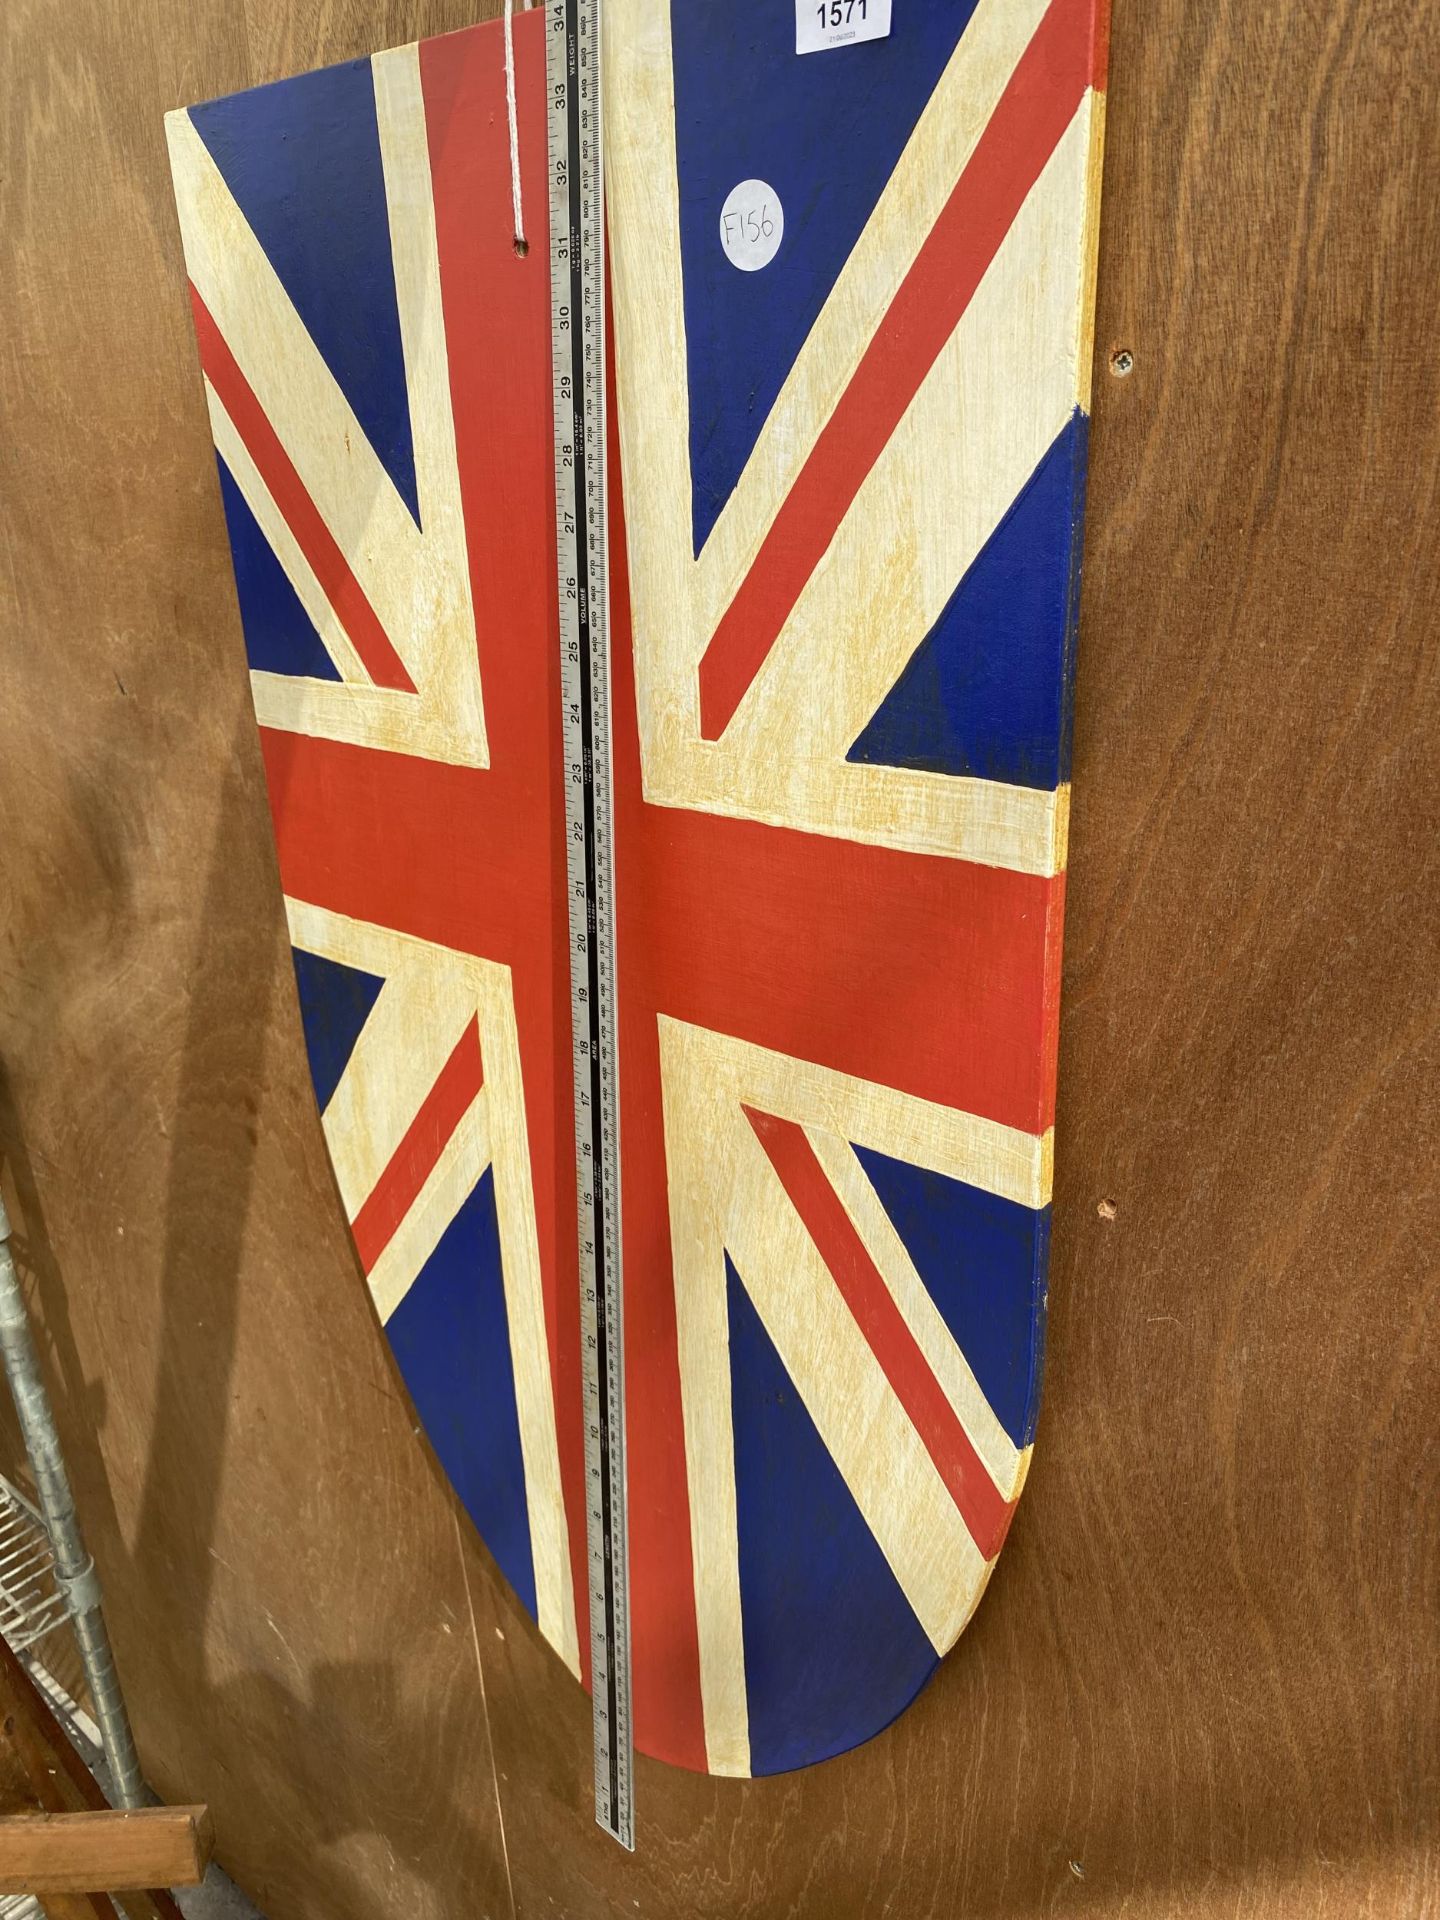 A WOODEN HAND PAINTED UNION JACK SIGN - Image 2 of 3